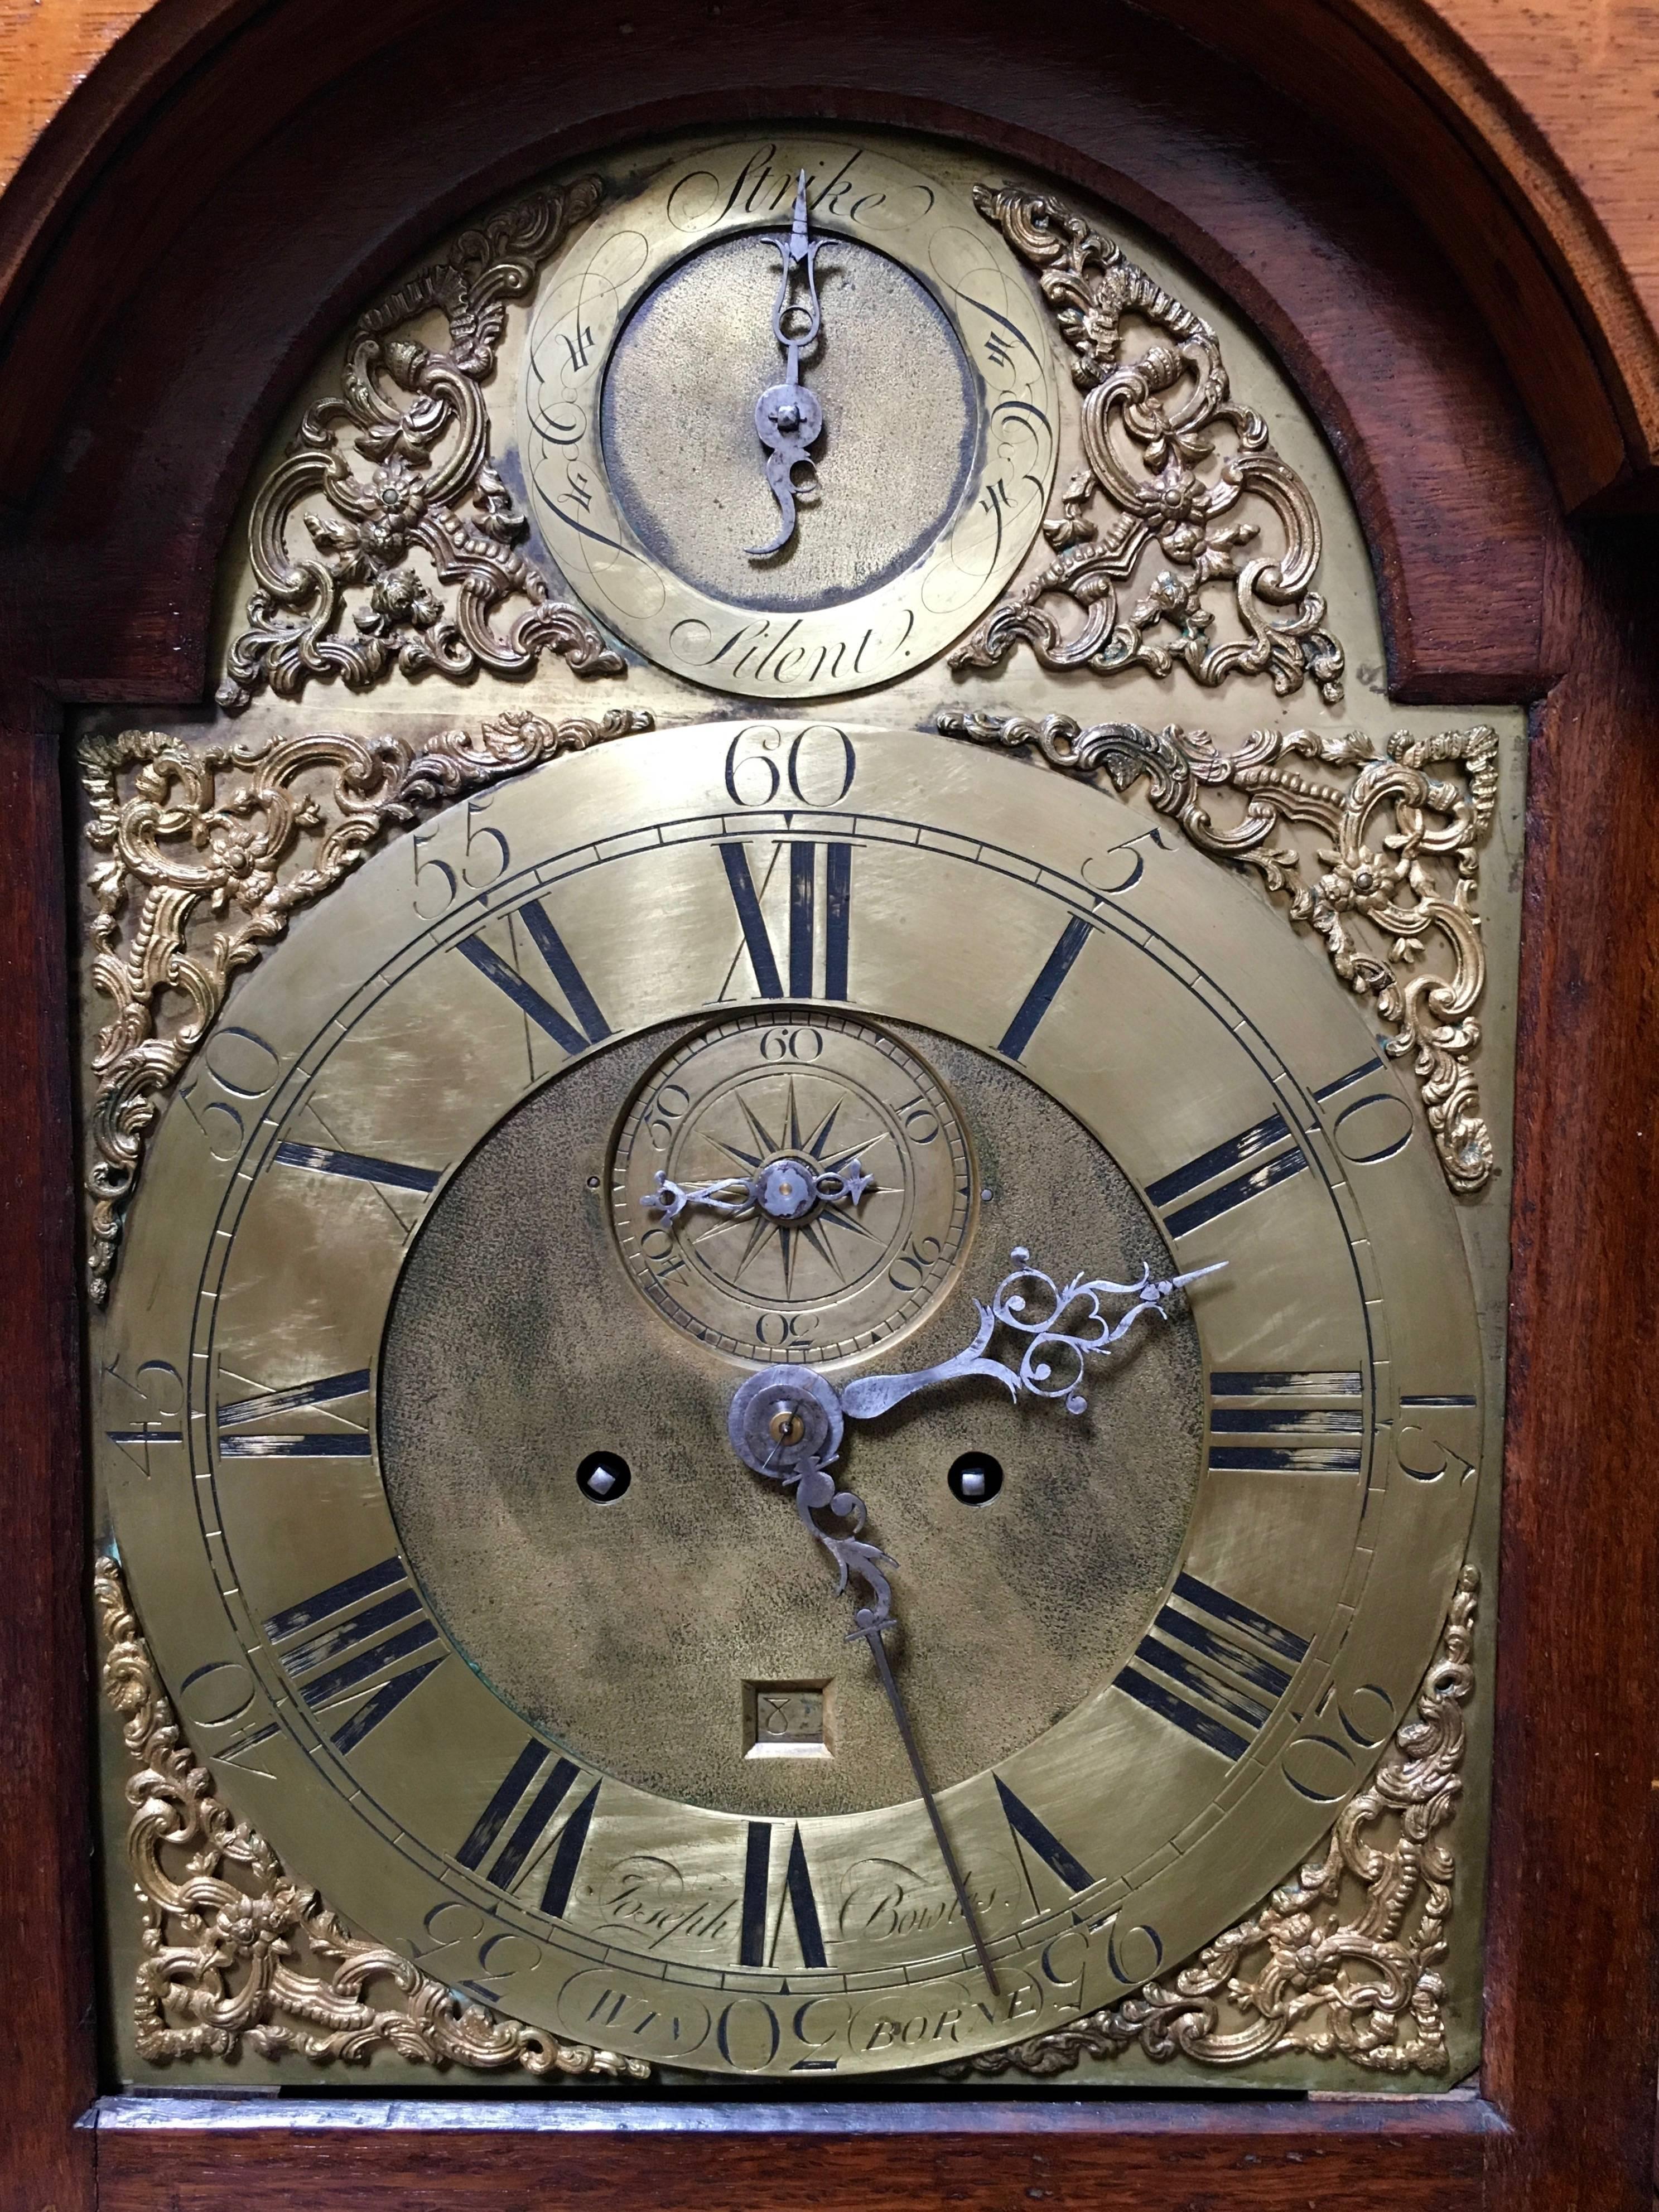 18th Century Longcase  8 Day time & strike  Clock by Joseph Bowles  MOVING SALE! 4